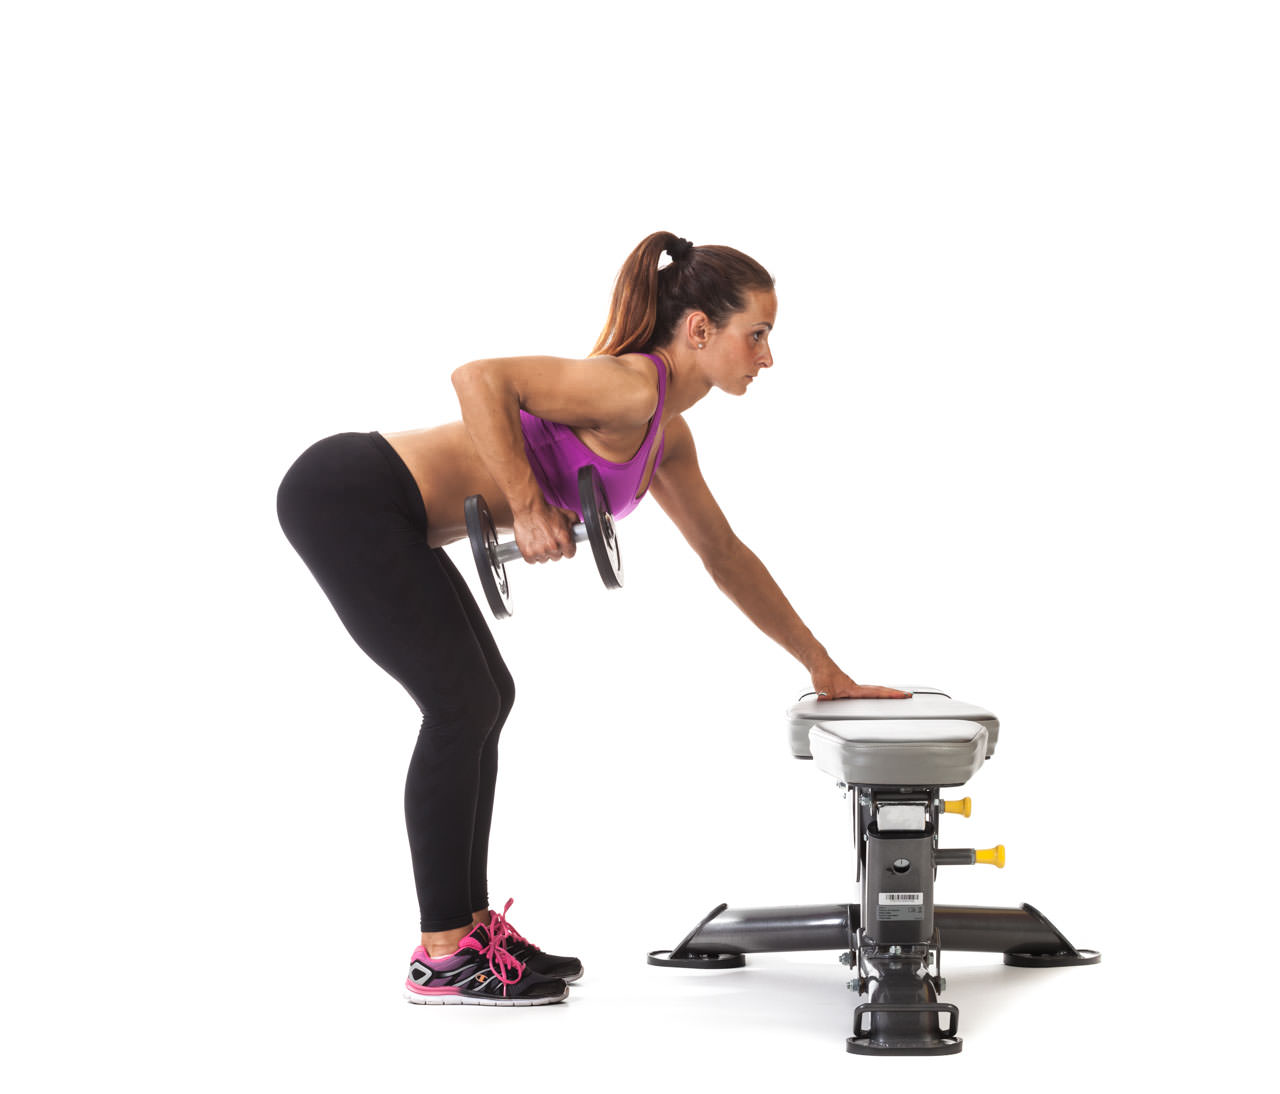 Bent Over One-Arm Dumbbell Row frame #2